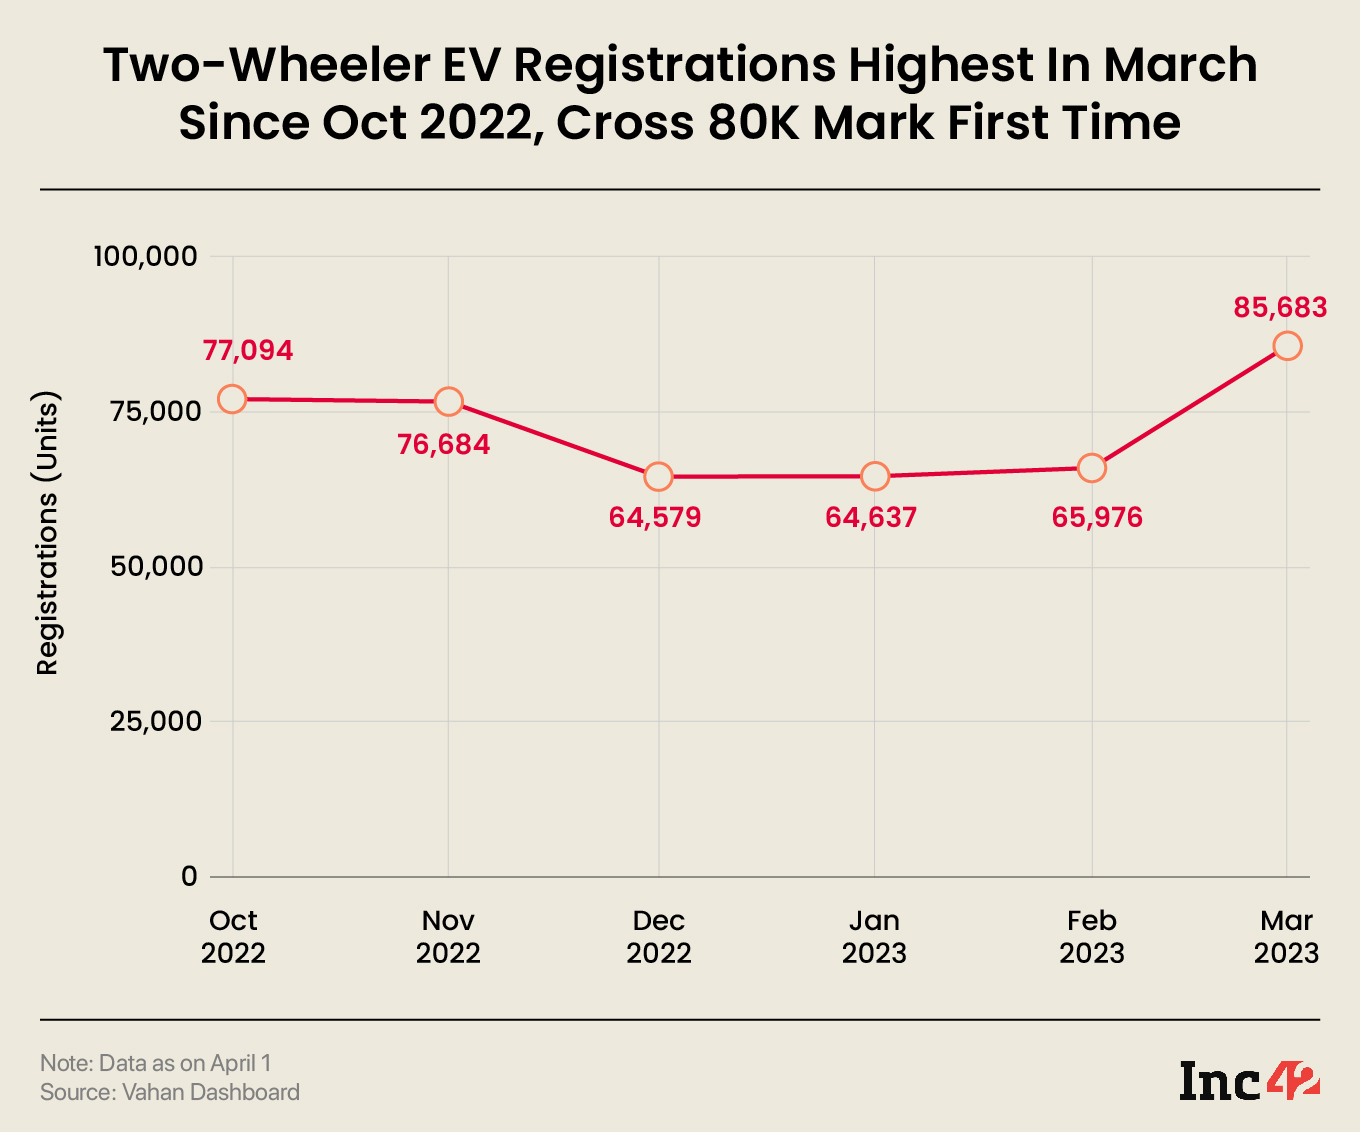 Two-Wheeler EV Registrations Highest In March Since Oct 2022, Cross 80K Mark First Time